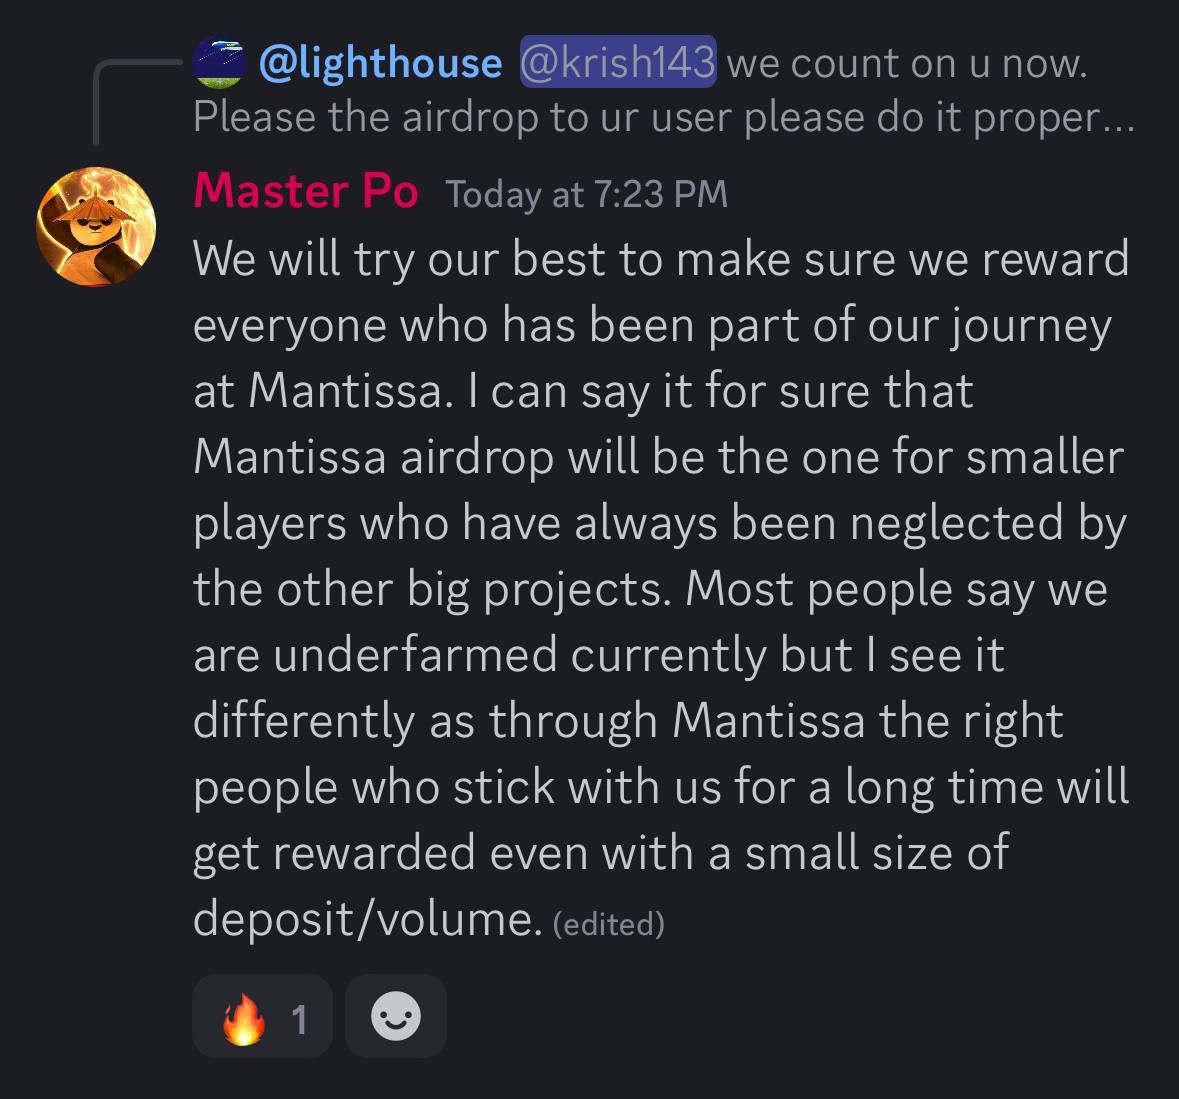 Underfarmed but valuing smaller players. Building through the bear market like it's a bull 😤💙